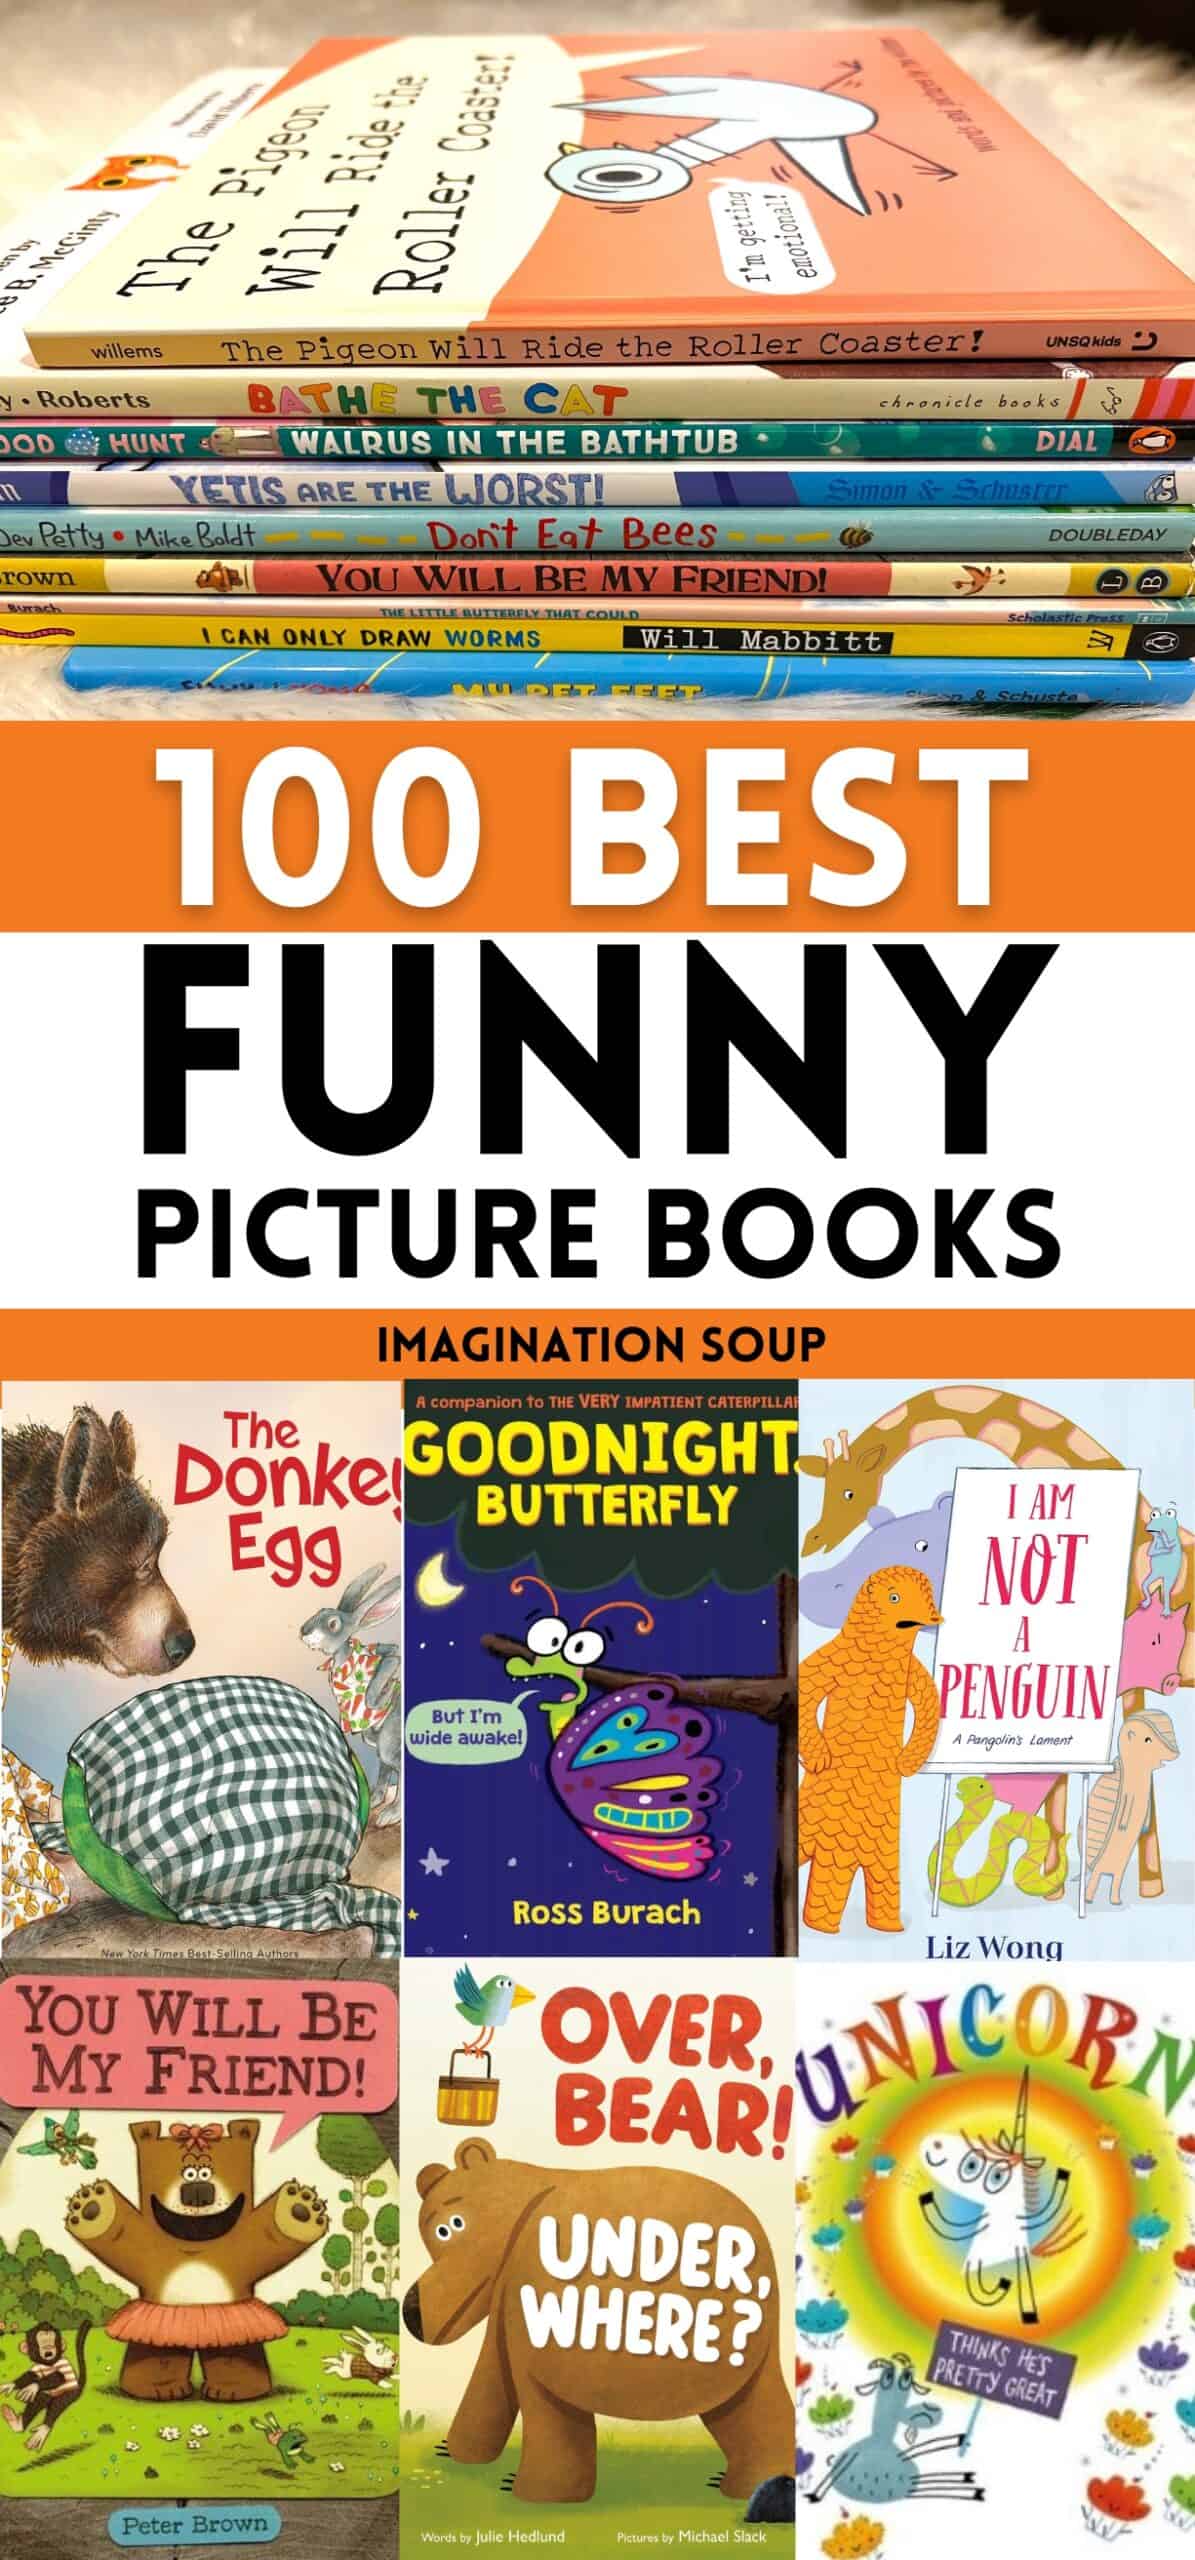 The Funniest, Funny Picture Books for Kids - Imagination Soup